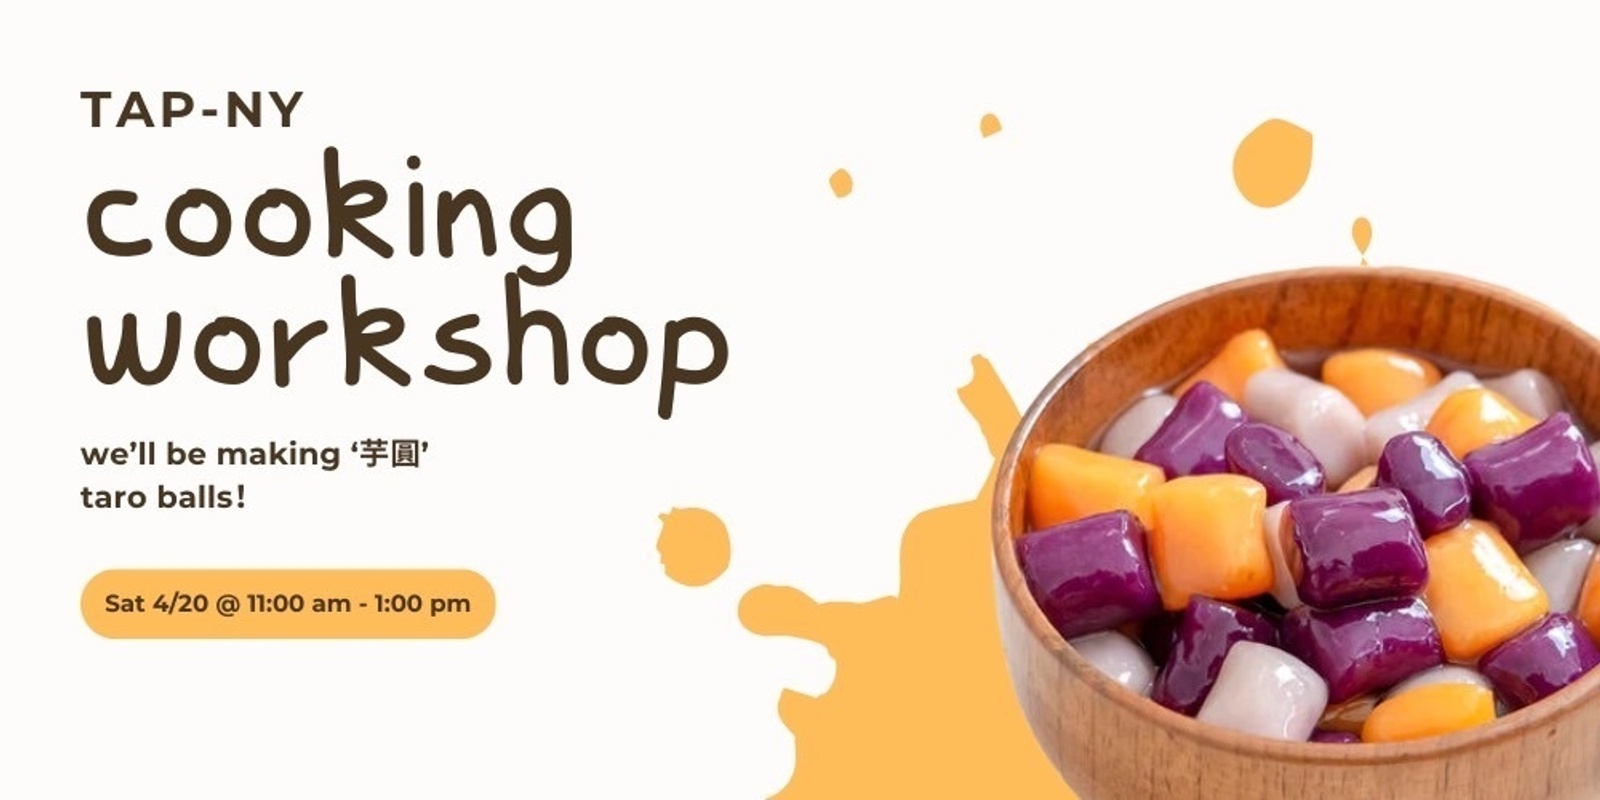 Banner image for TAP-NY Cooking Workshop - Taro balls (芋圓）